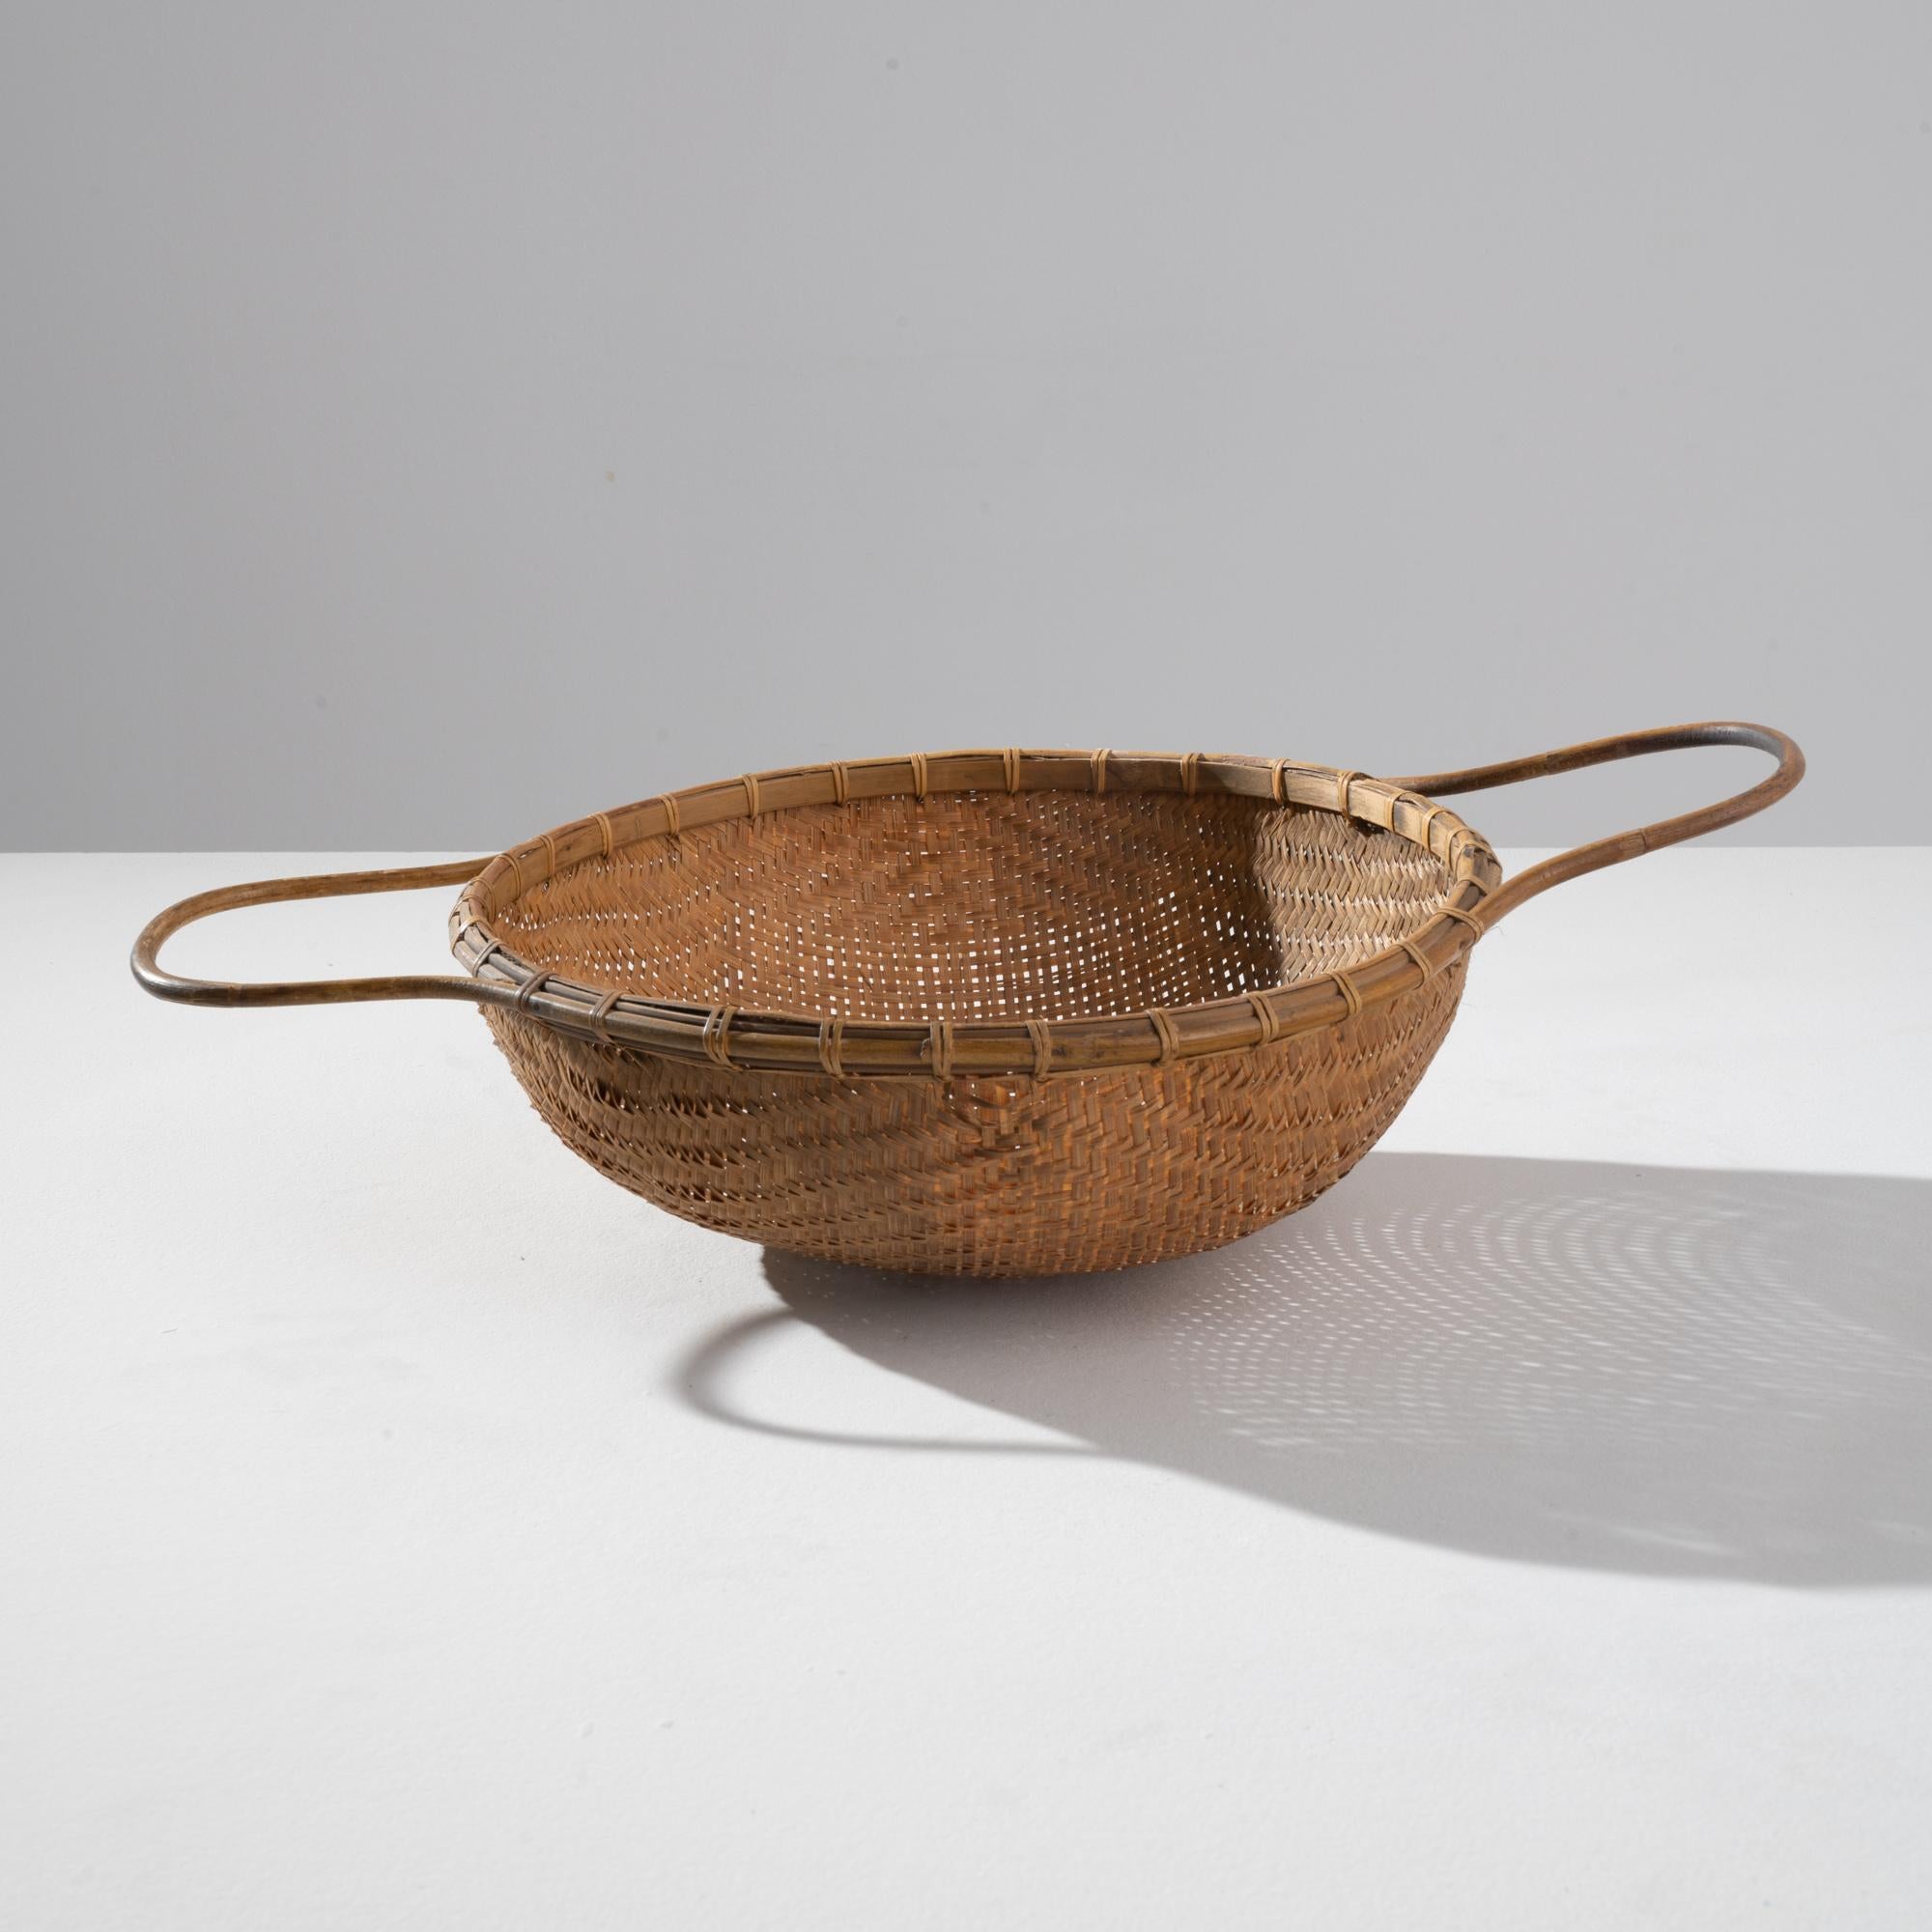 This beautiful vintage wicker basket has a timeless simplicity. Rustic and handcrafted, a bowl of woven rushes is finished with a circular band of bent cane; the sinuous line of the handles displays a mastery of these ancient Craft techniques. The